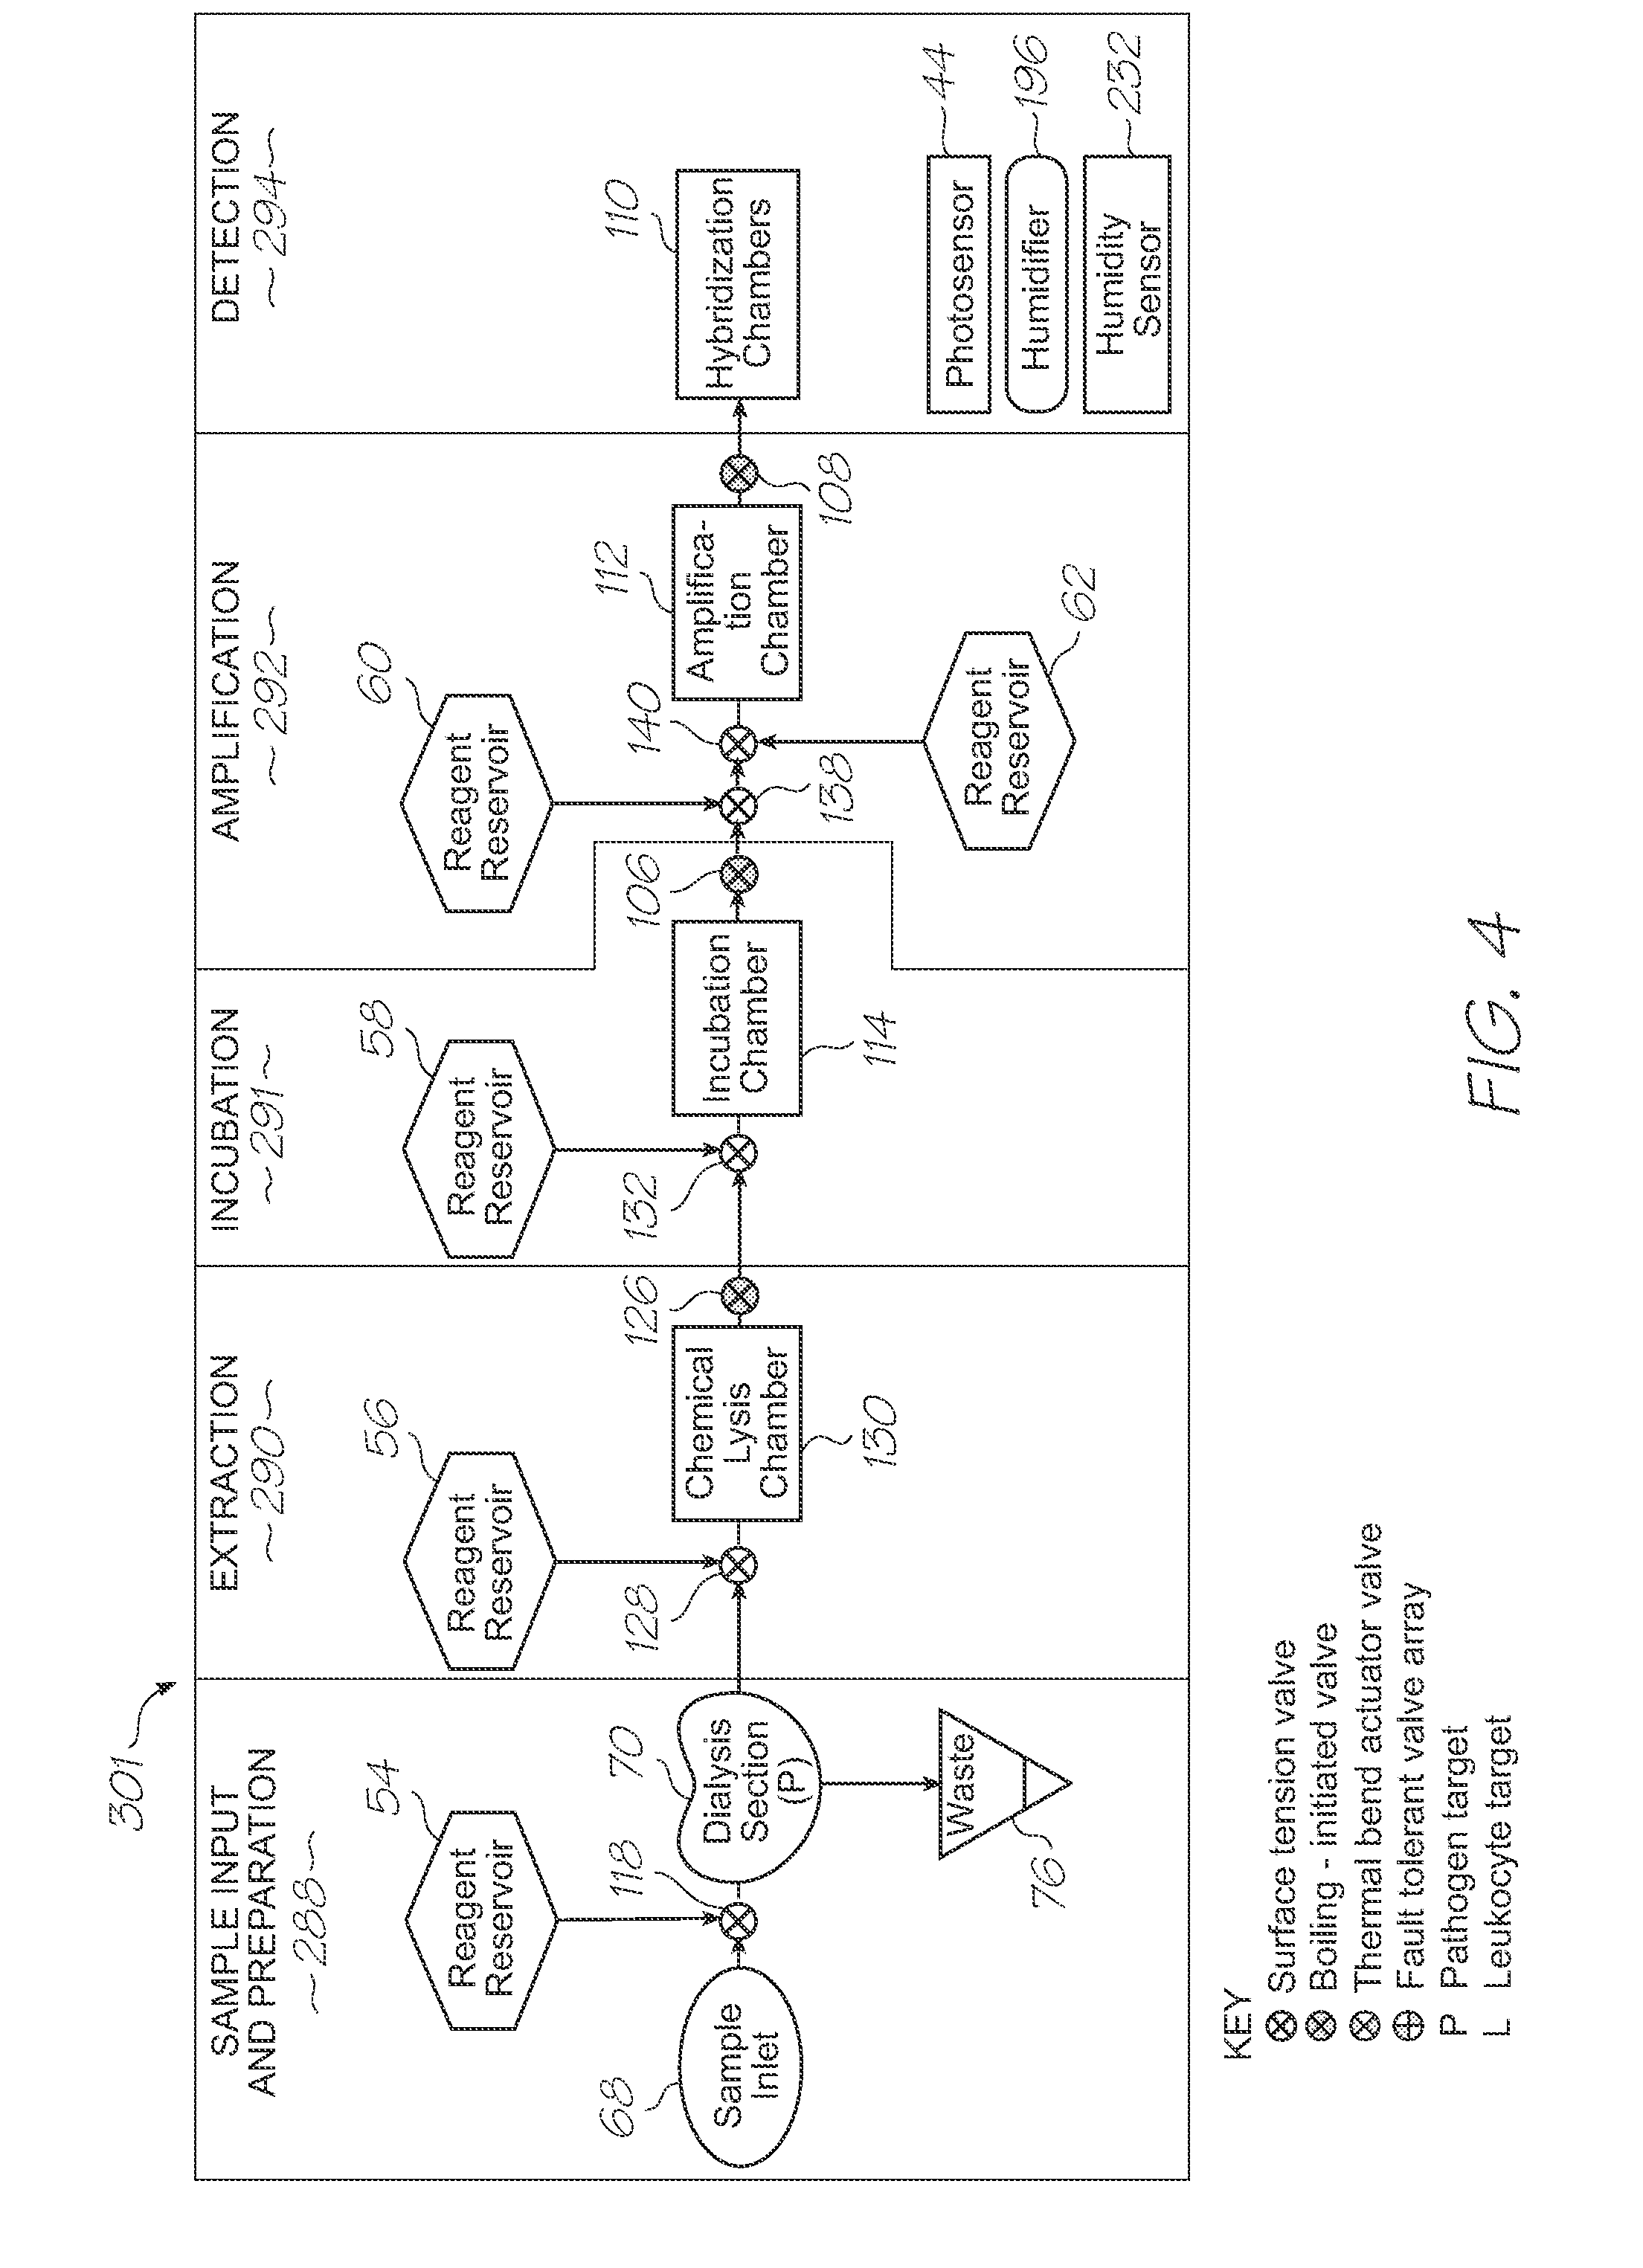 Microfluidic device with thermal bend actuated pressure pulse valve